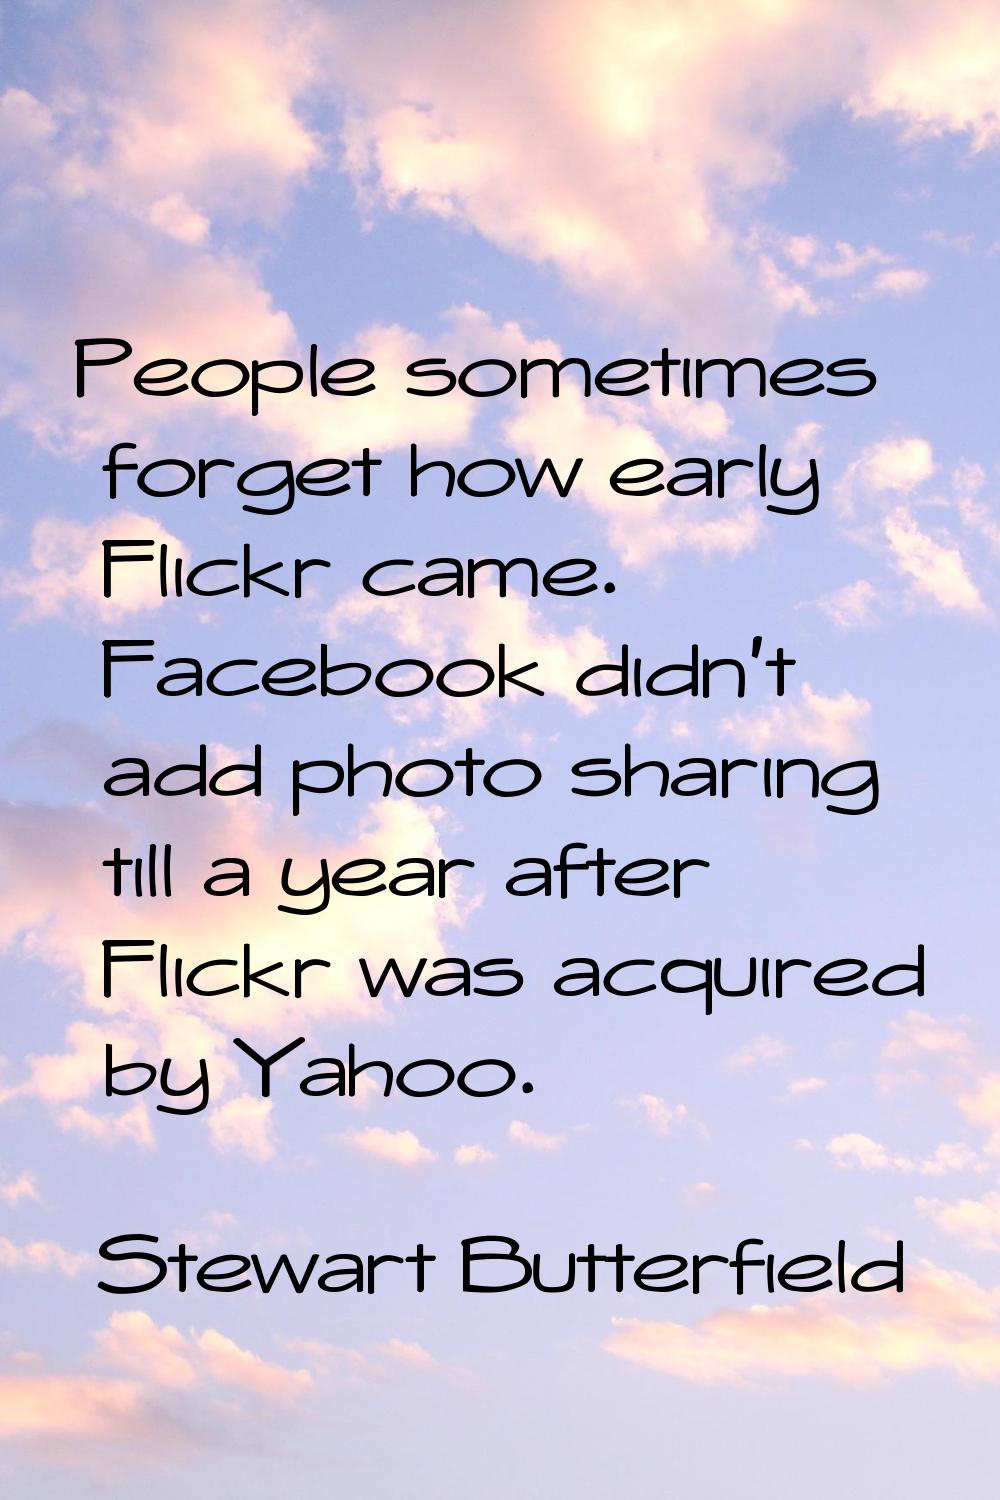 People sometimes forget how early Flickr came. Facebook didn't add photo sharing till a year after 